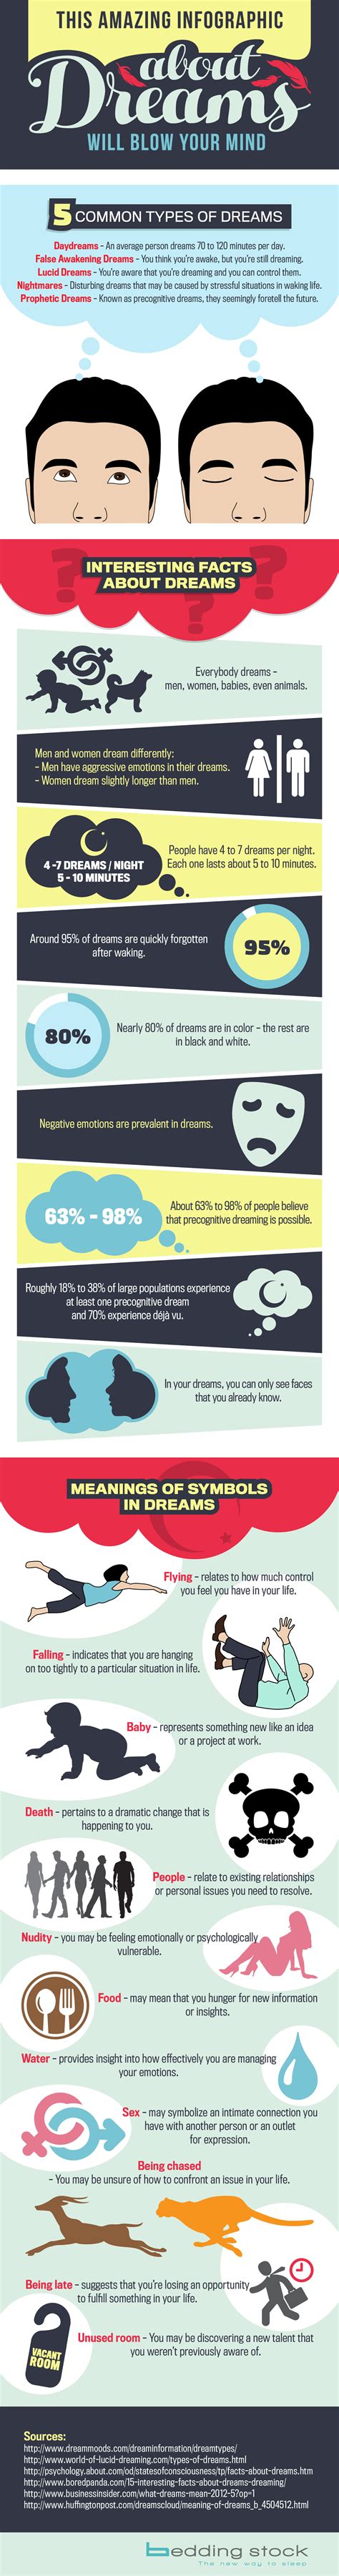 This Amazing Infographic About Dreams Will Blow Your Mind Infographic